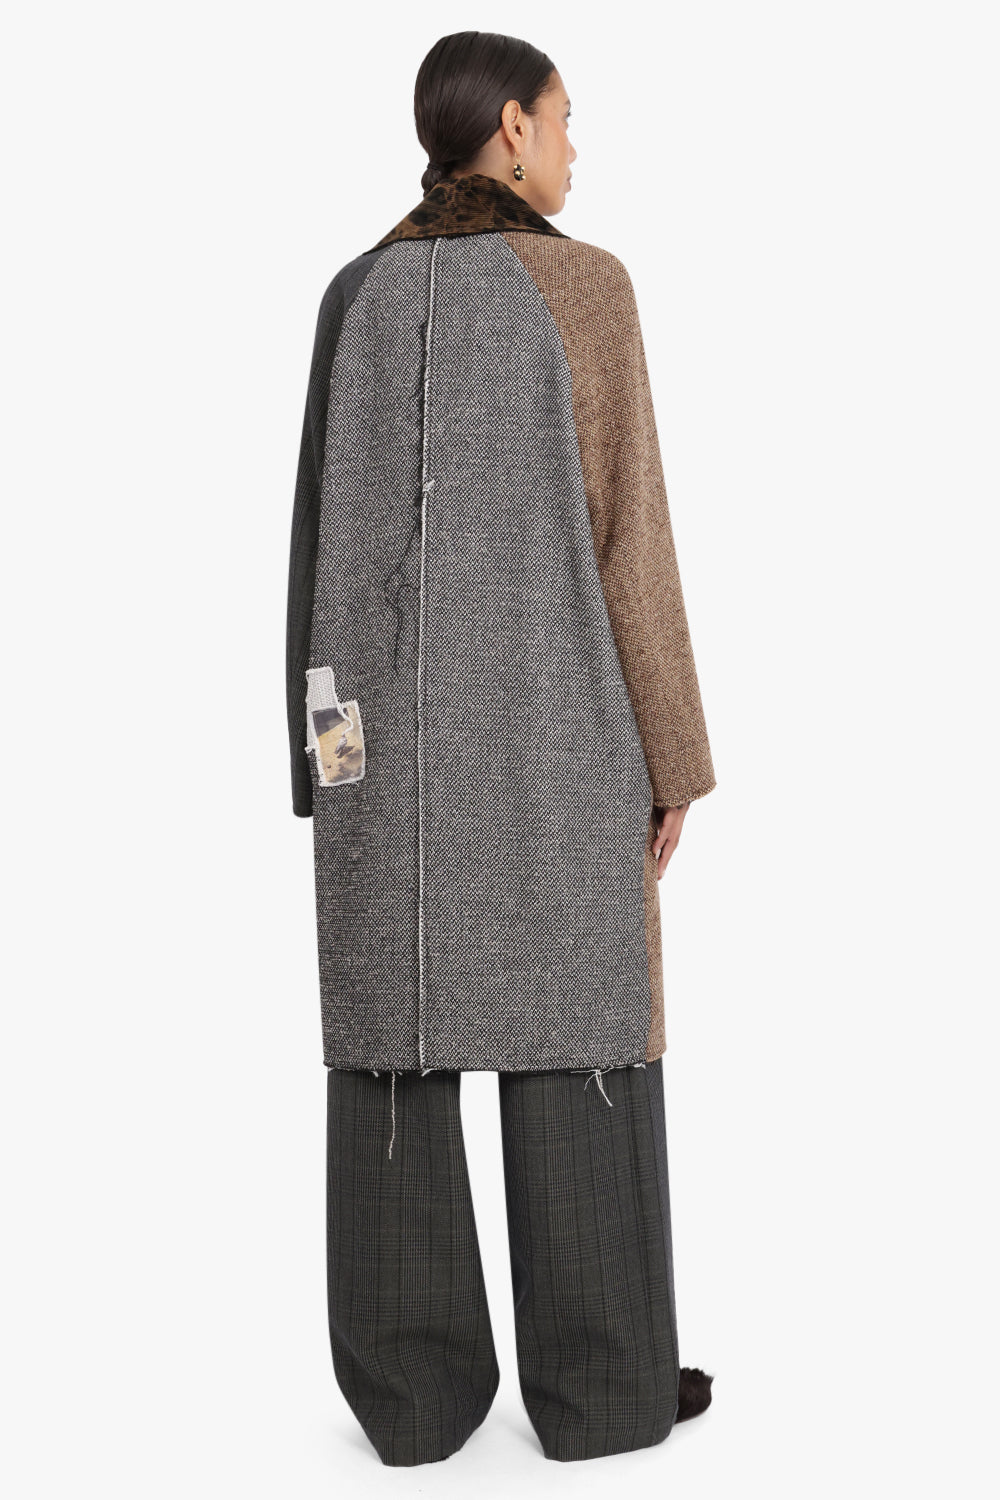 SONG FOR THE MUTE RTW Raglan Coat in Glen Check | Charcoal